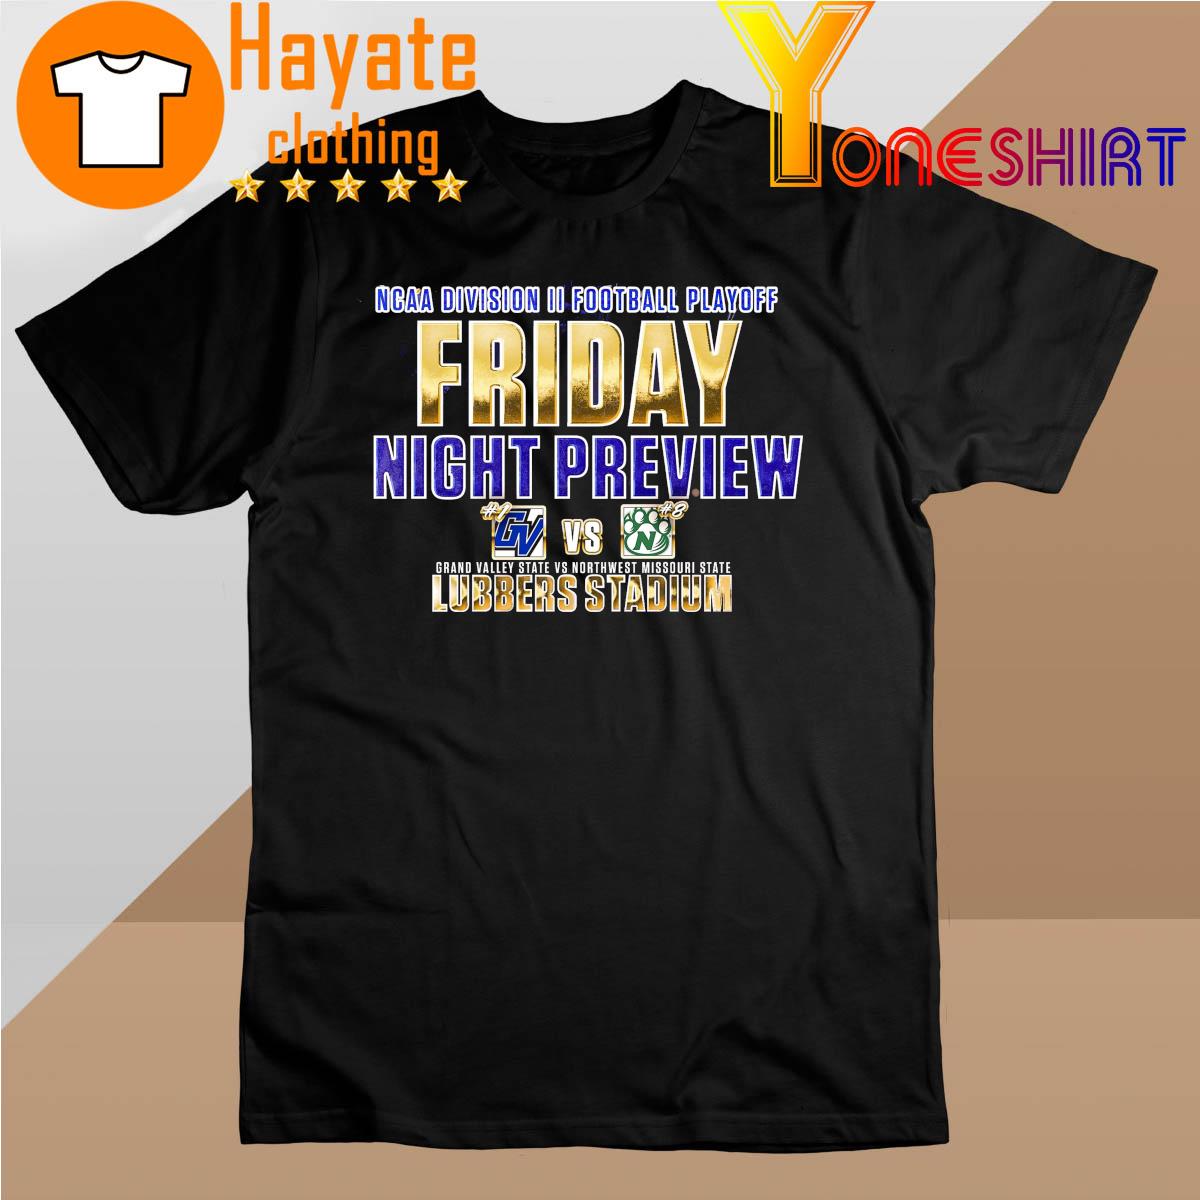 NCAA Division II Football Playoff Friday Night Preview Grand Valley State vs Northwest Missouri State Lubbers Stadium shirt